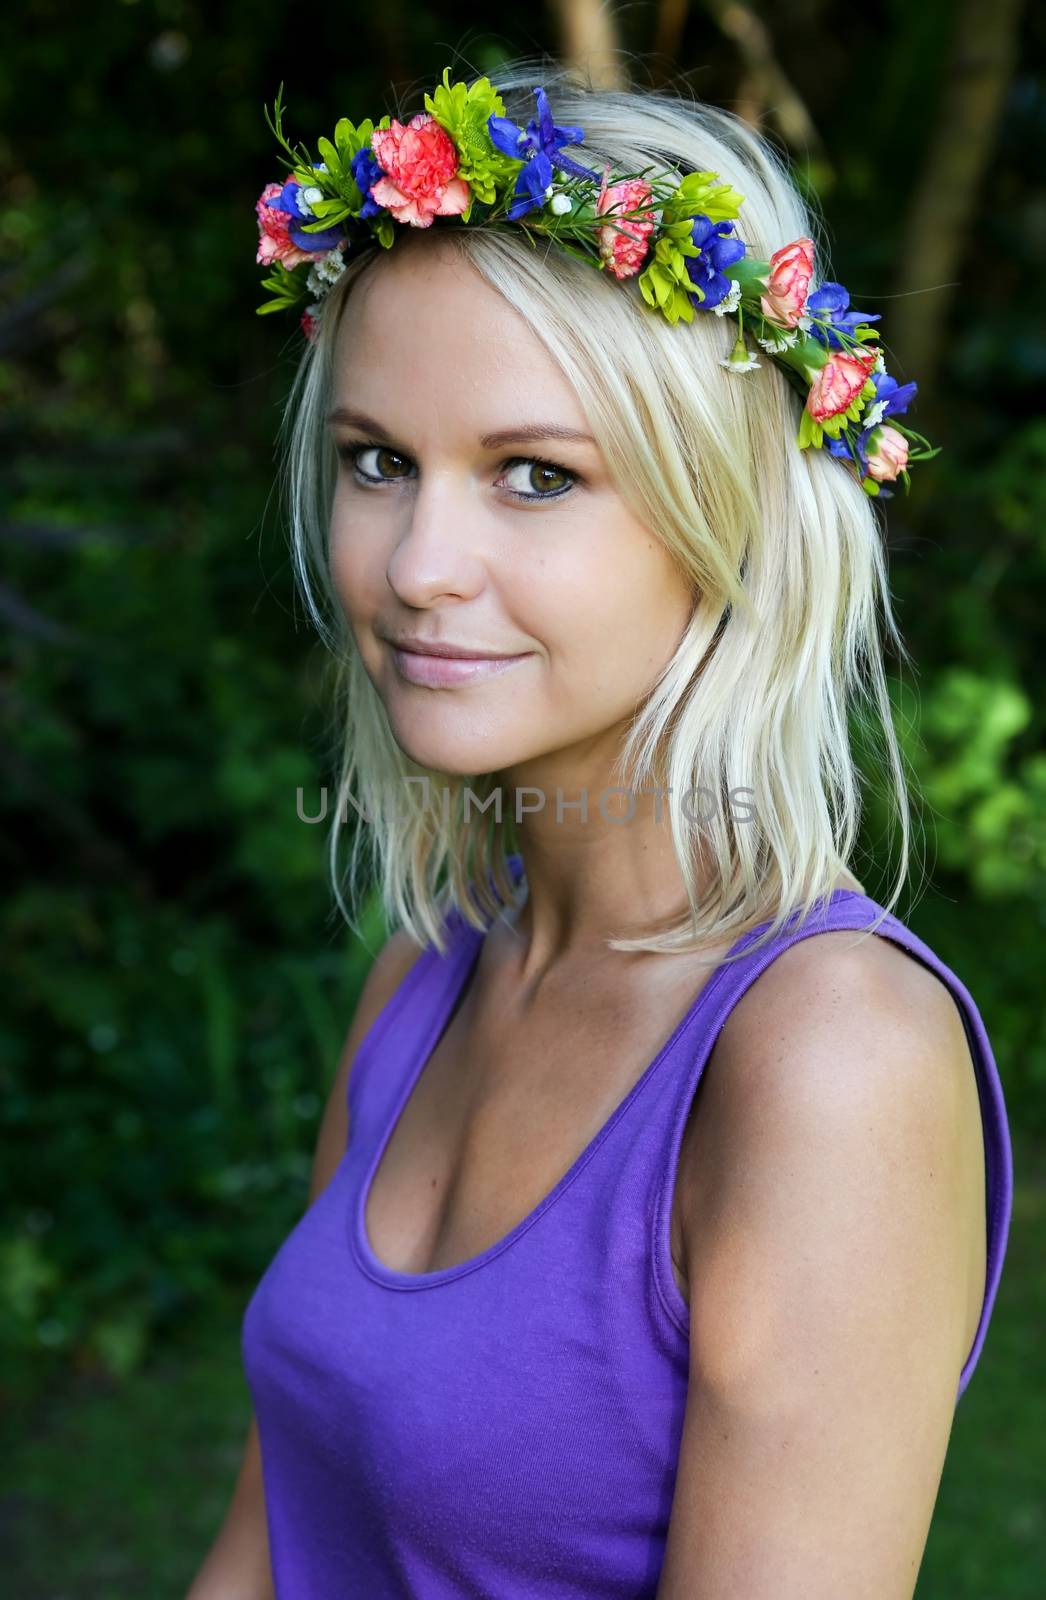 Lovely Young Blonde Lady with Garland of Flowers by fouroaks